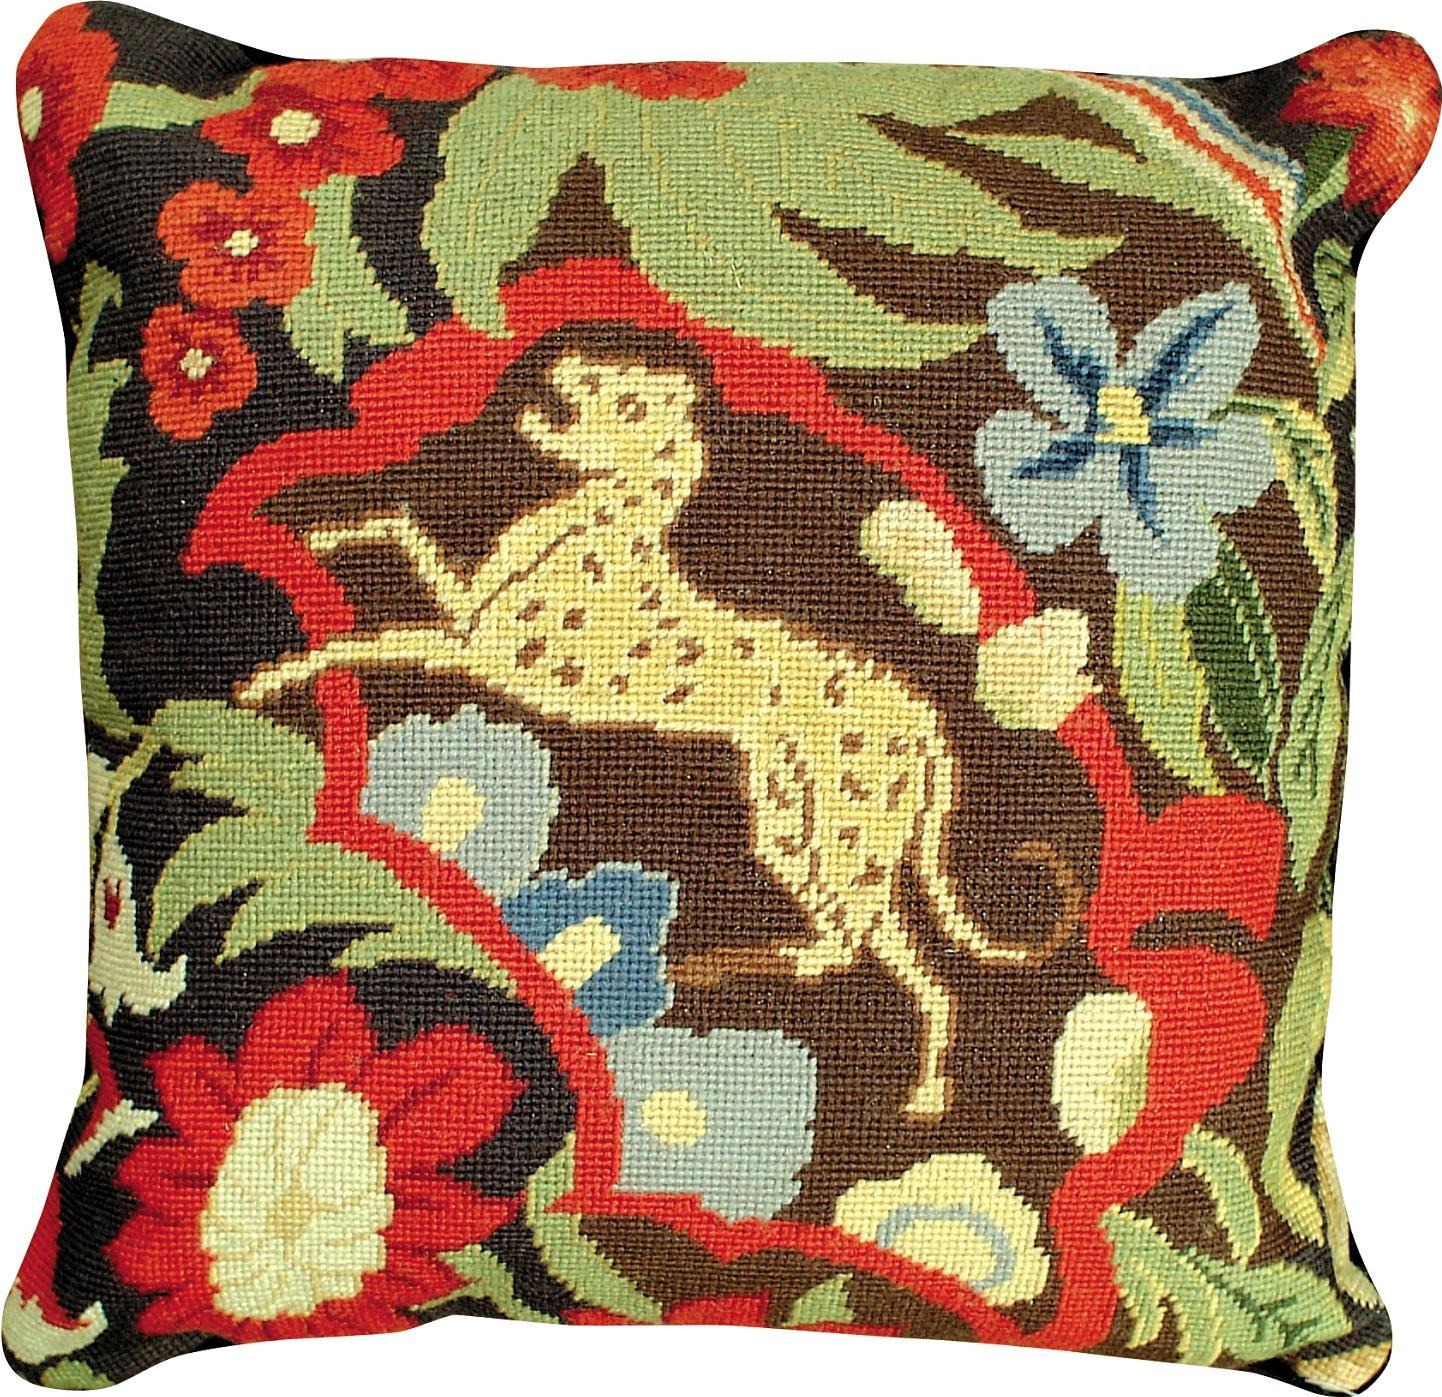 Throw Pillow Needlepoint 18x18 Gold Gray Green Black Blue Red Yellow Down-Image 1